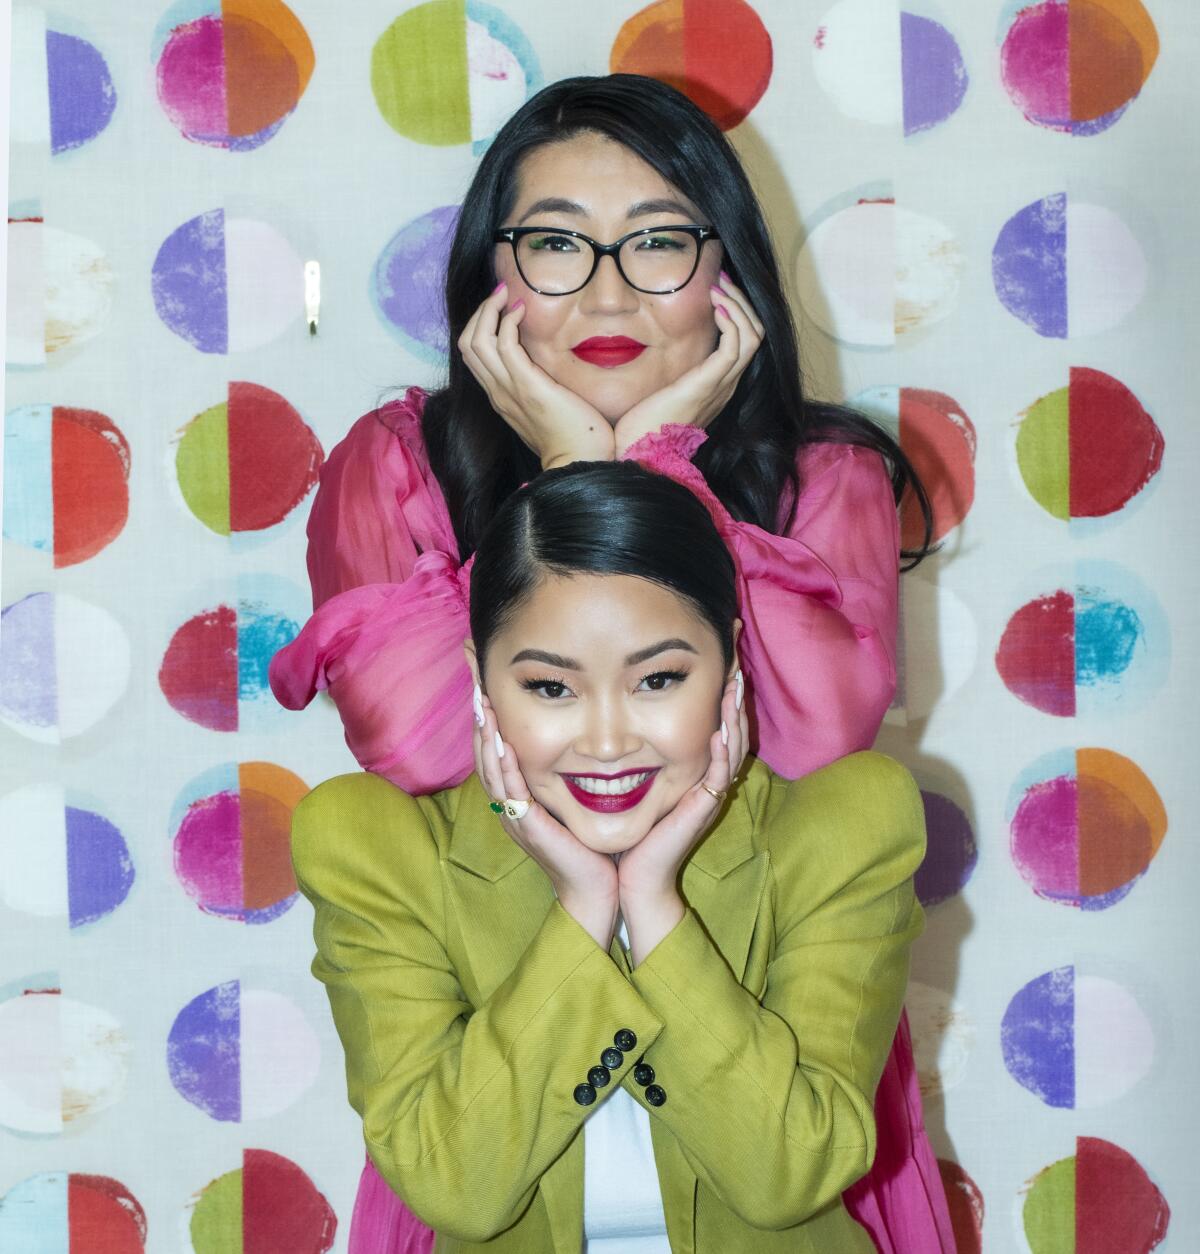 "To All The Boys 2," filmed back to back with a third installment based on the bestselling YA novels, follows teen heroine Lara Jean (Lana Condor, below, with author Jenny Han) into uncharted emotional territory.